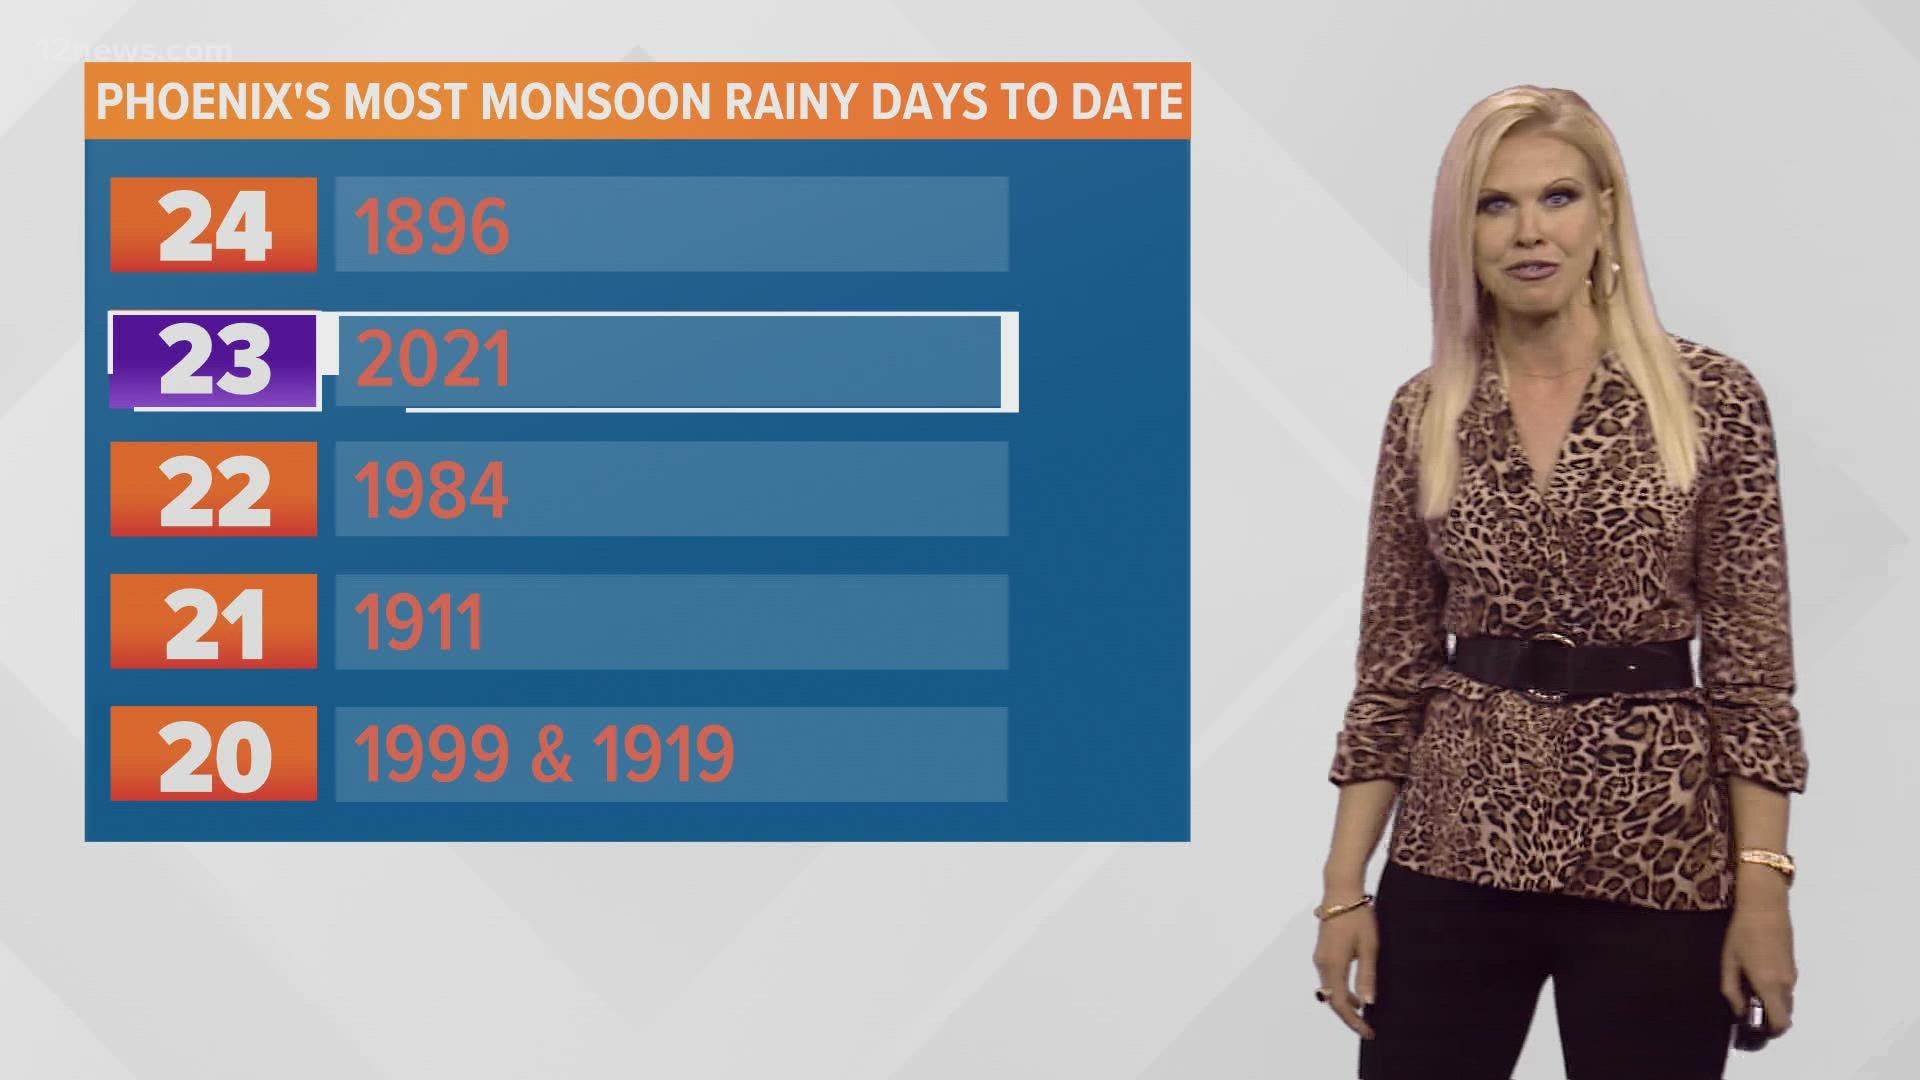 The record may be broken sometime this week before Arizona's monsoon season ends on Sept. 30.